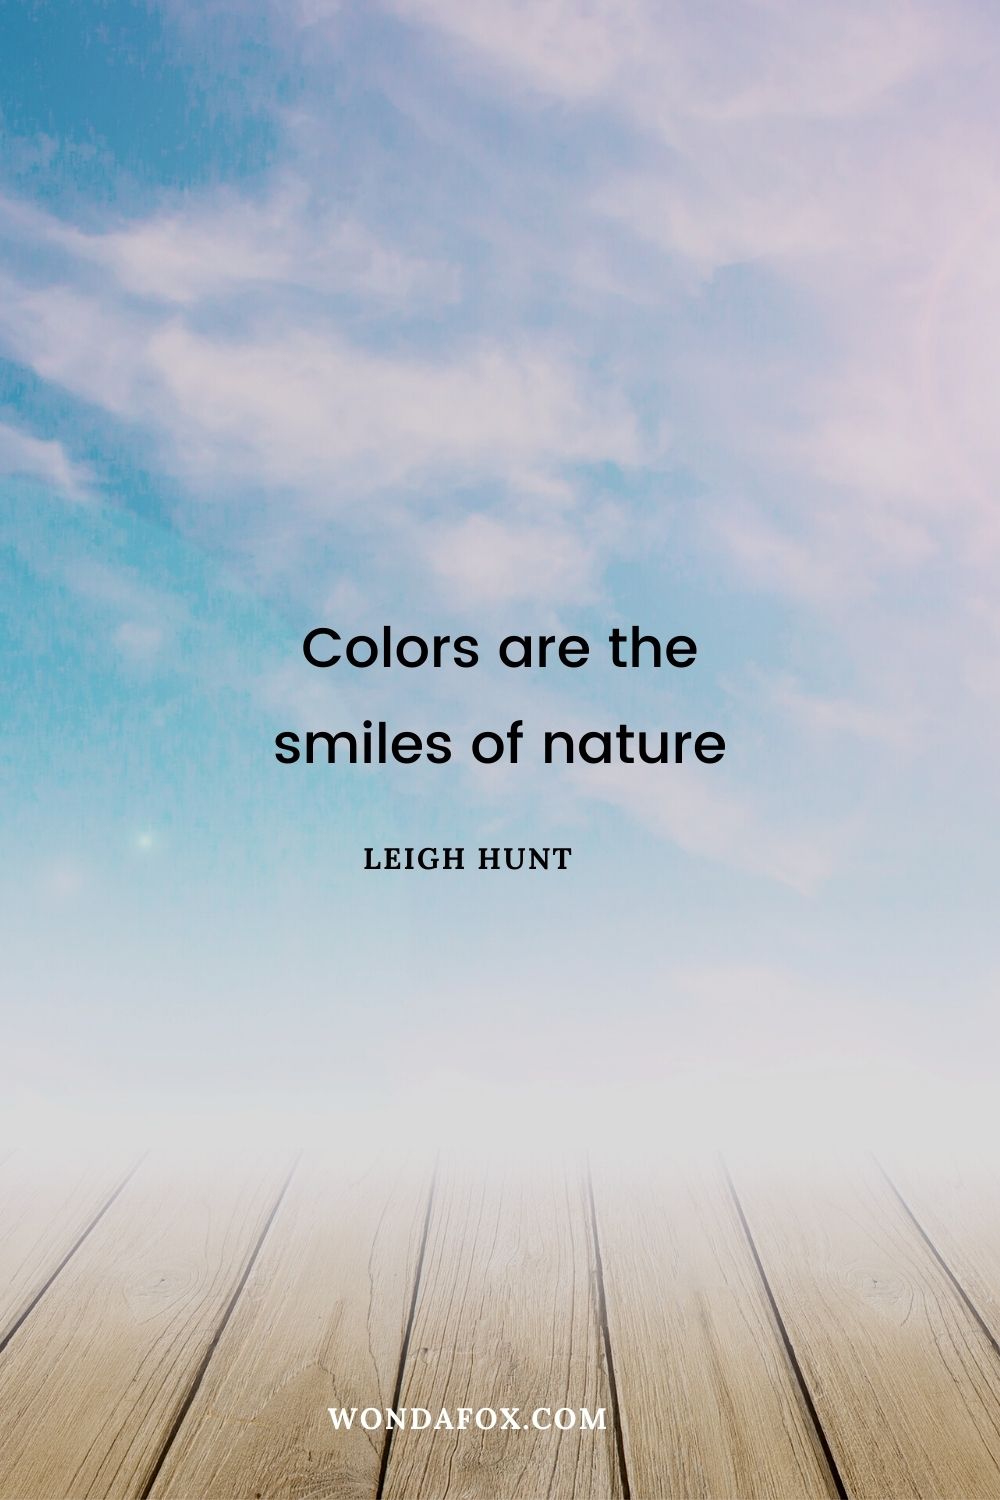 Colors are the smiles of nature